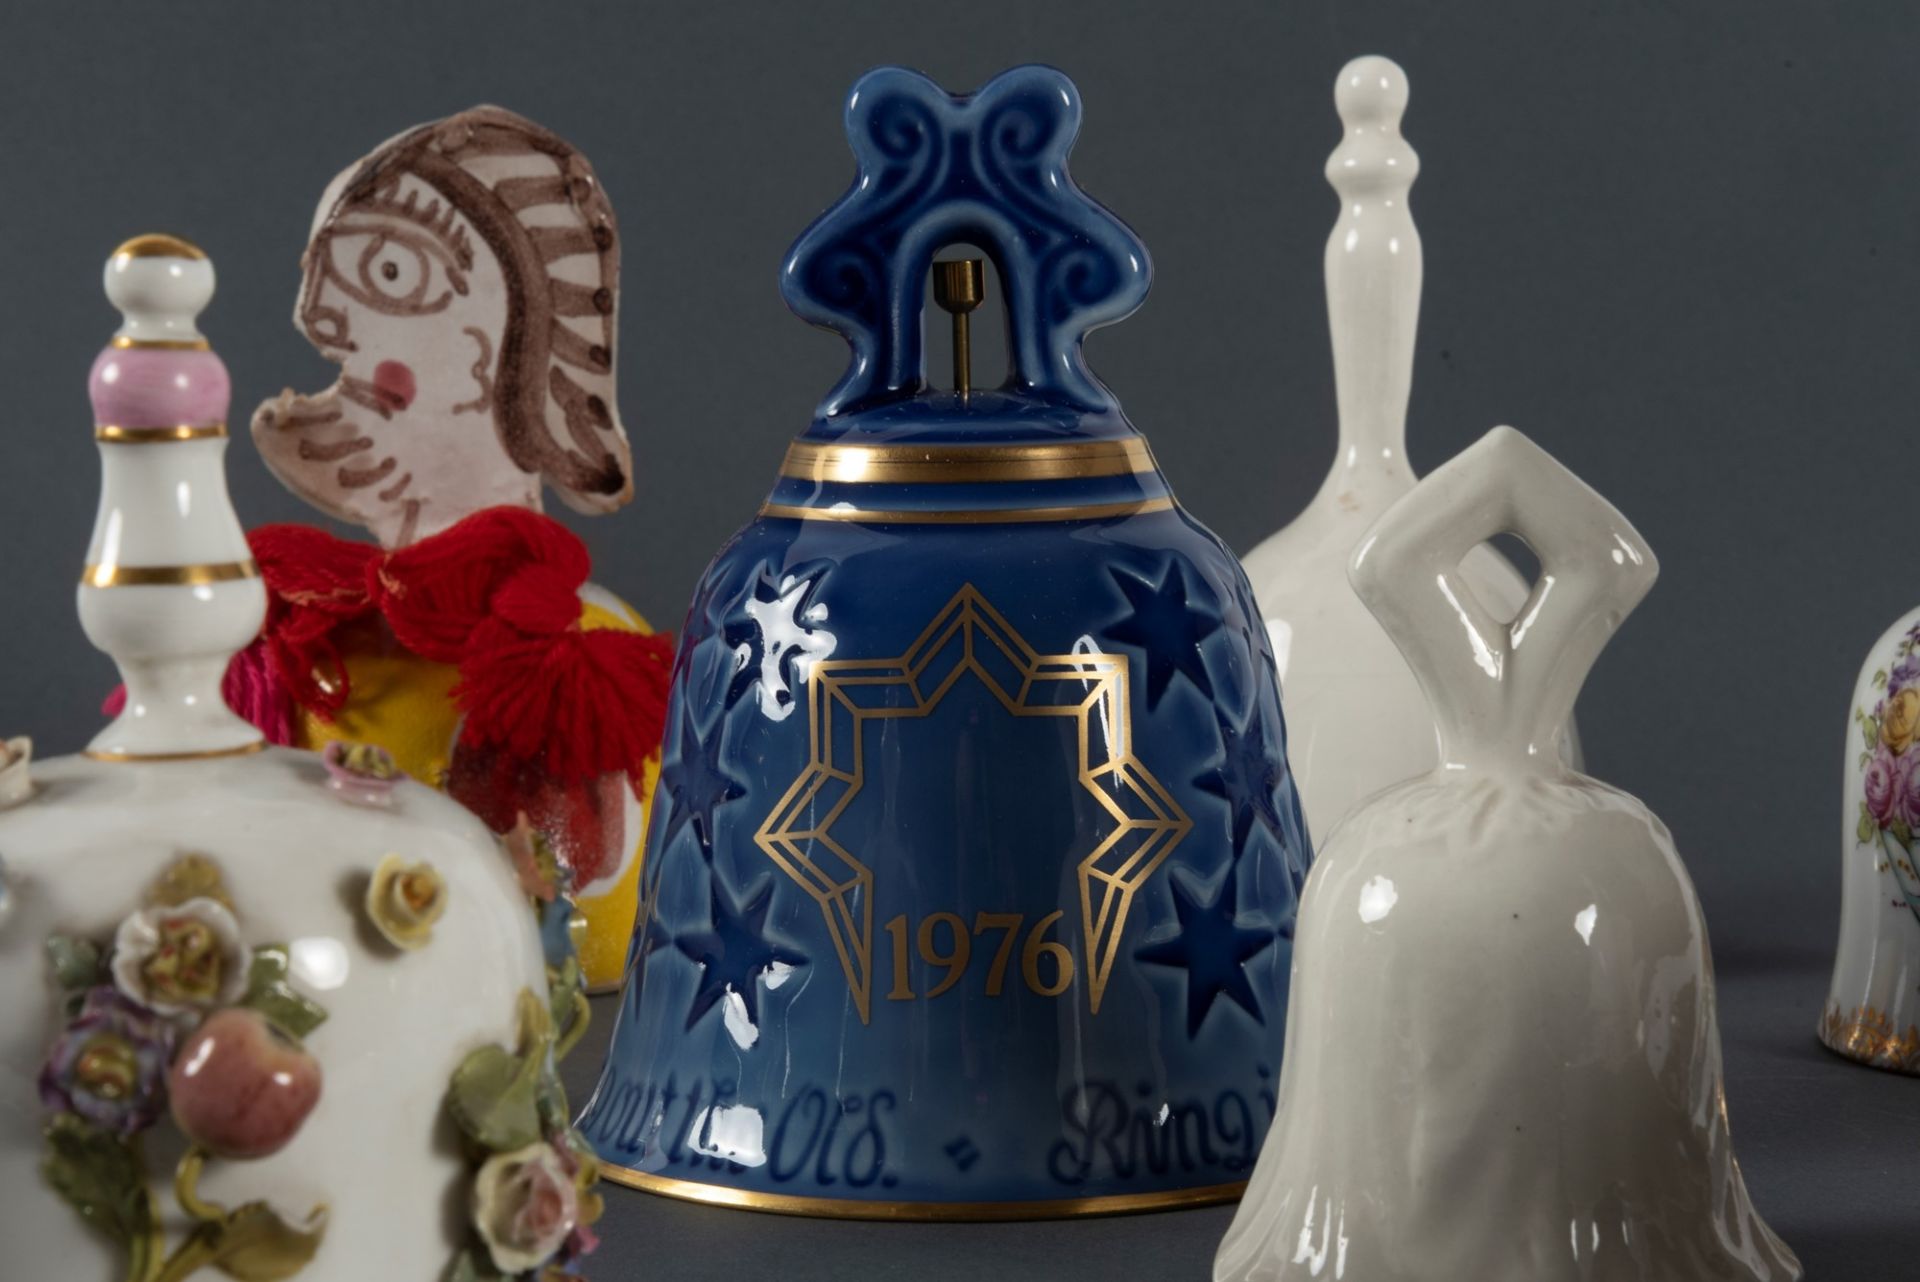 Lot consisting of seventeen bells in porcelain and white and polychrome majolica, 20th century - Image 3 of 3